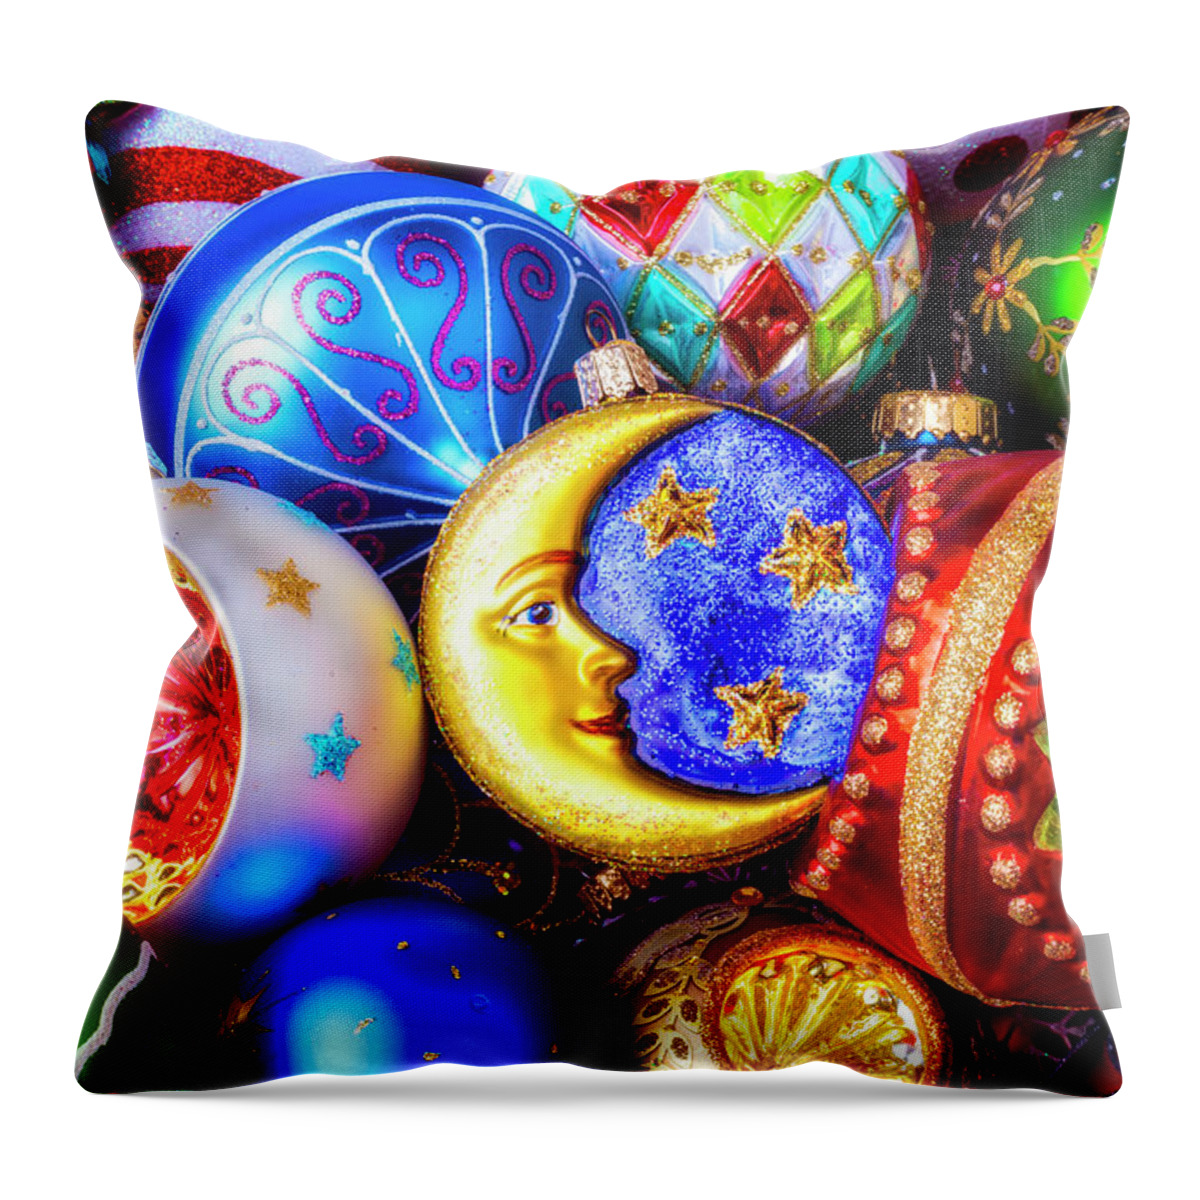 Abundance Red Fancy Throw Pillow featuring the photograph Moon And Stars Christmas Ornament by Garry Gay